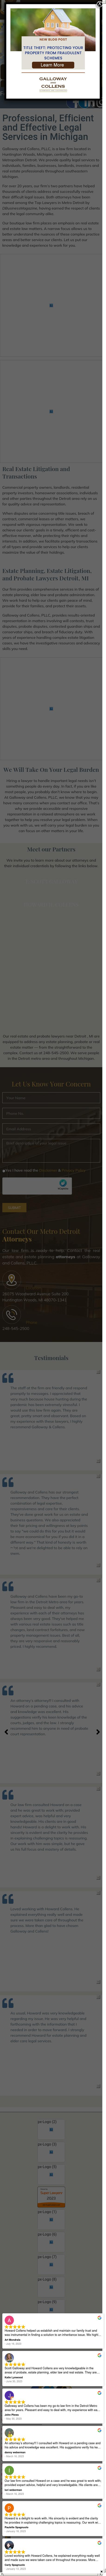 Galloway and Collens, PLLC - Huntington Woods MI Lawyers